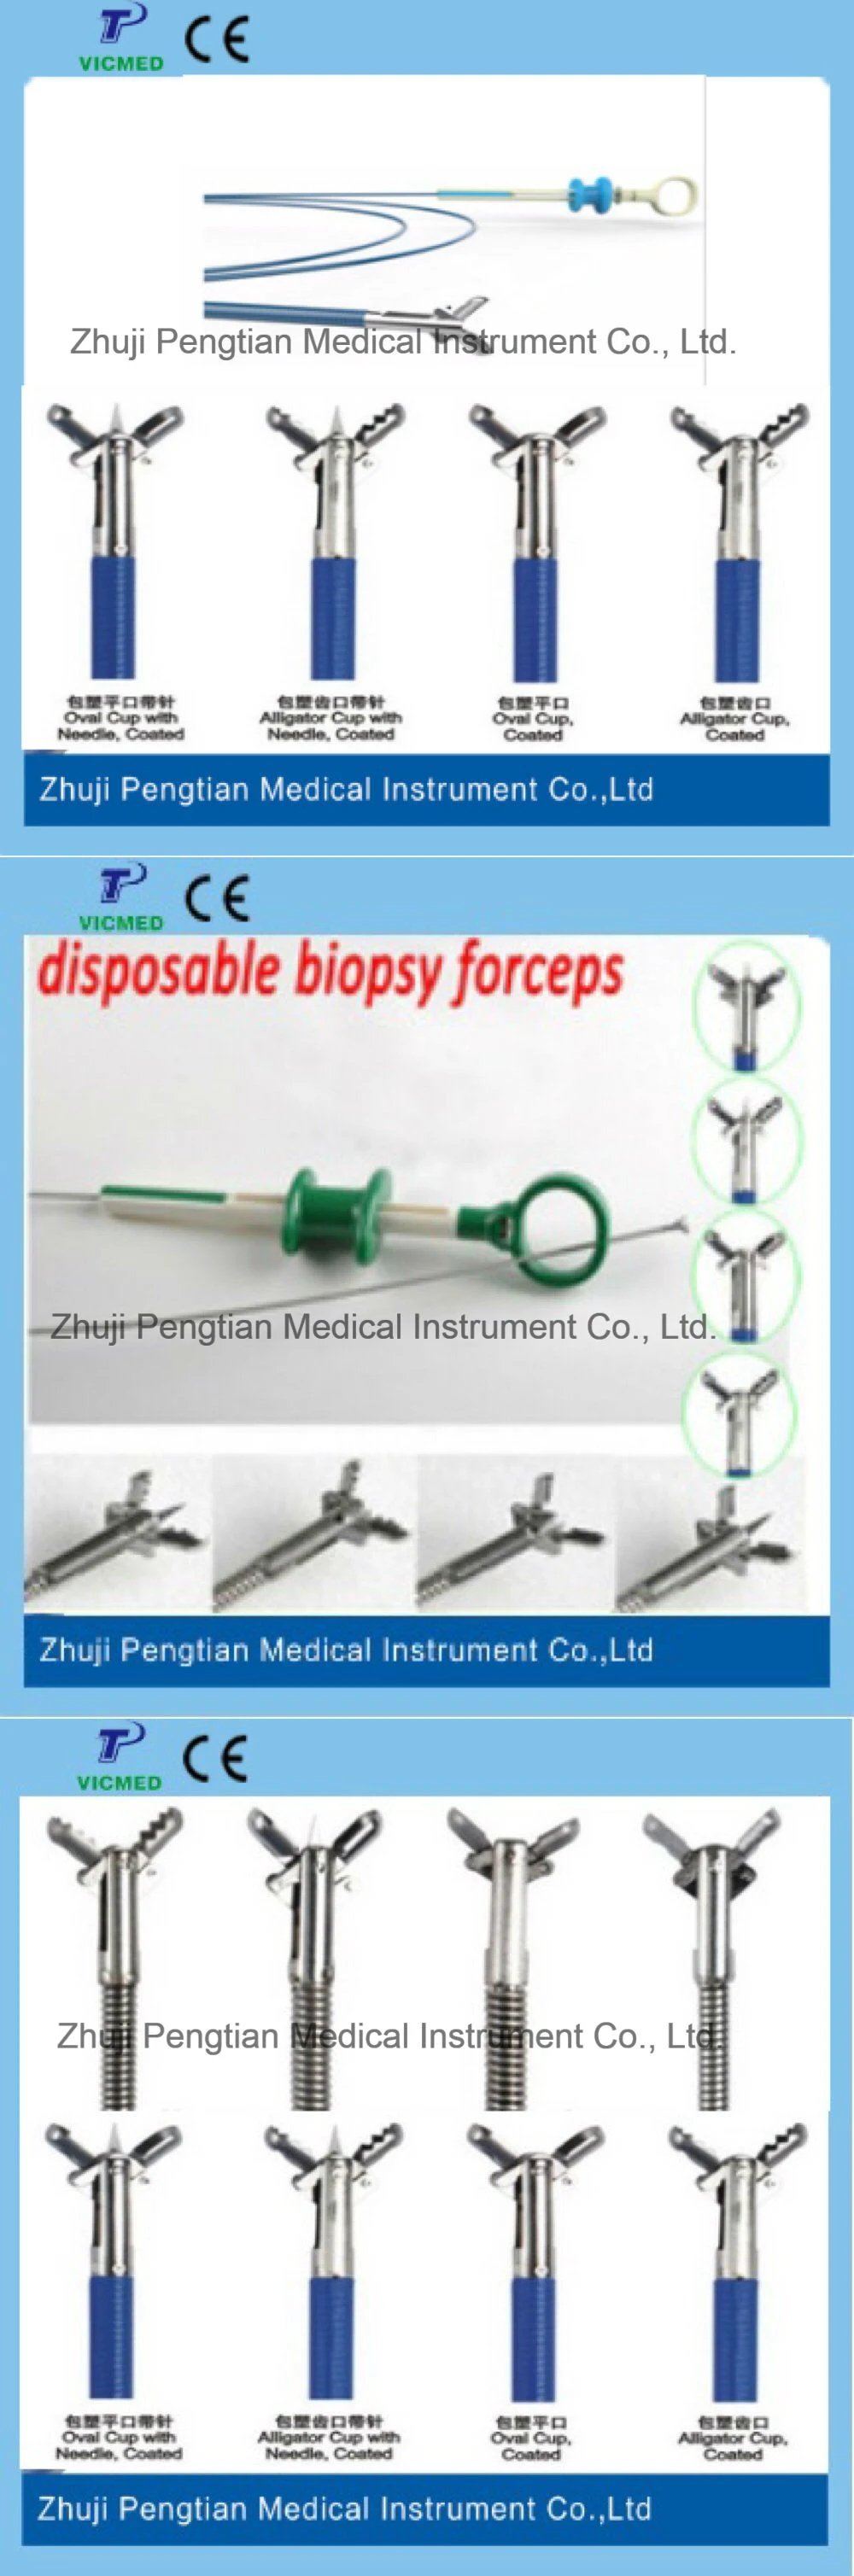 2.3m Diameter Disposable Endoscopic Biopsy Forceps with Spike Needle